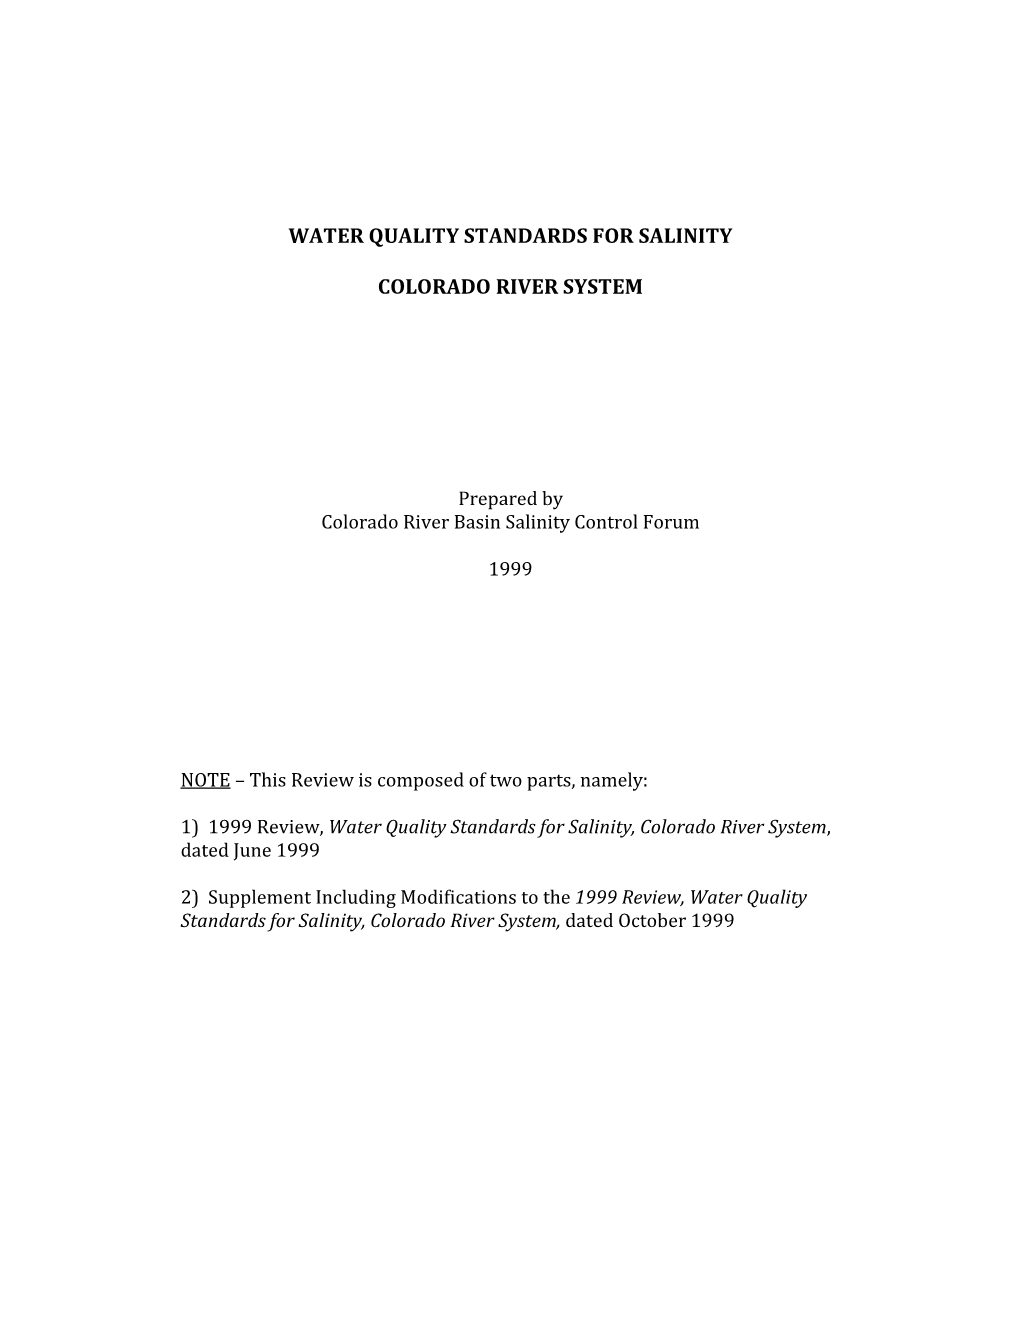 1999 Review, Water Quality Standards for Salinity, Colorado River System, Dated June 1999